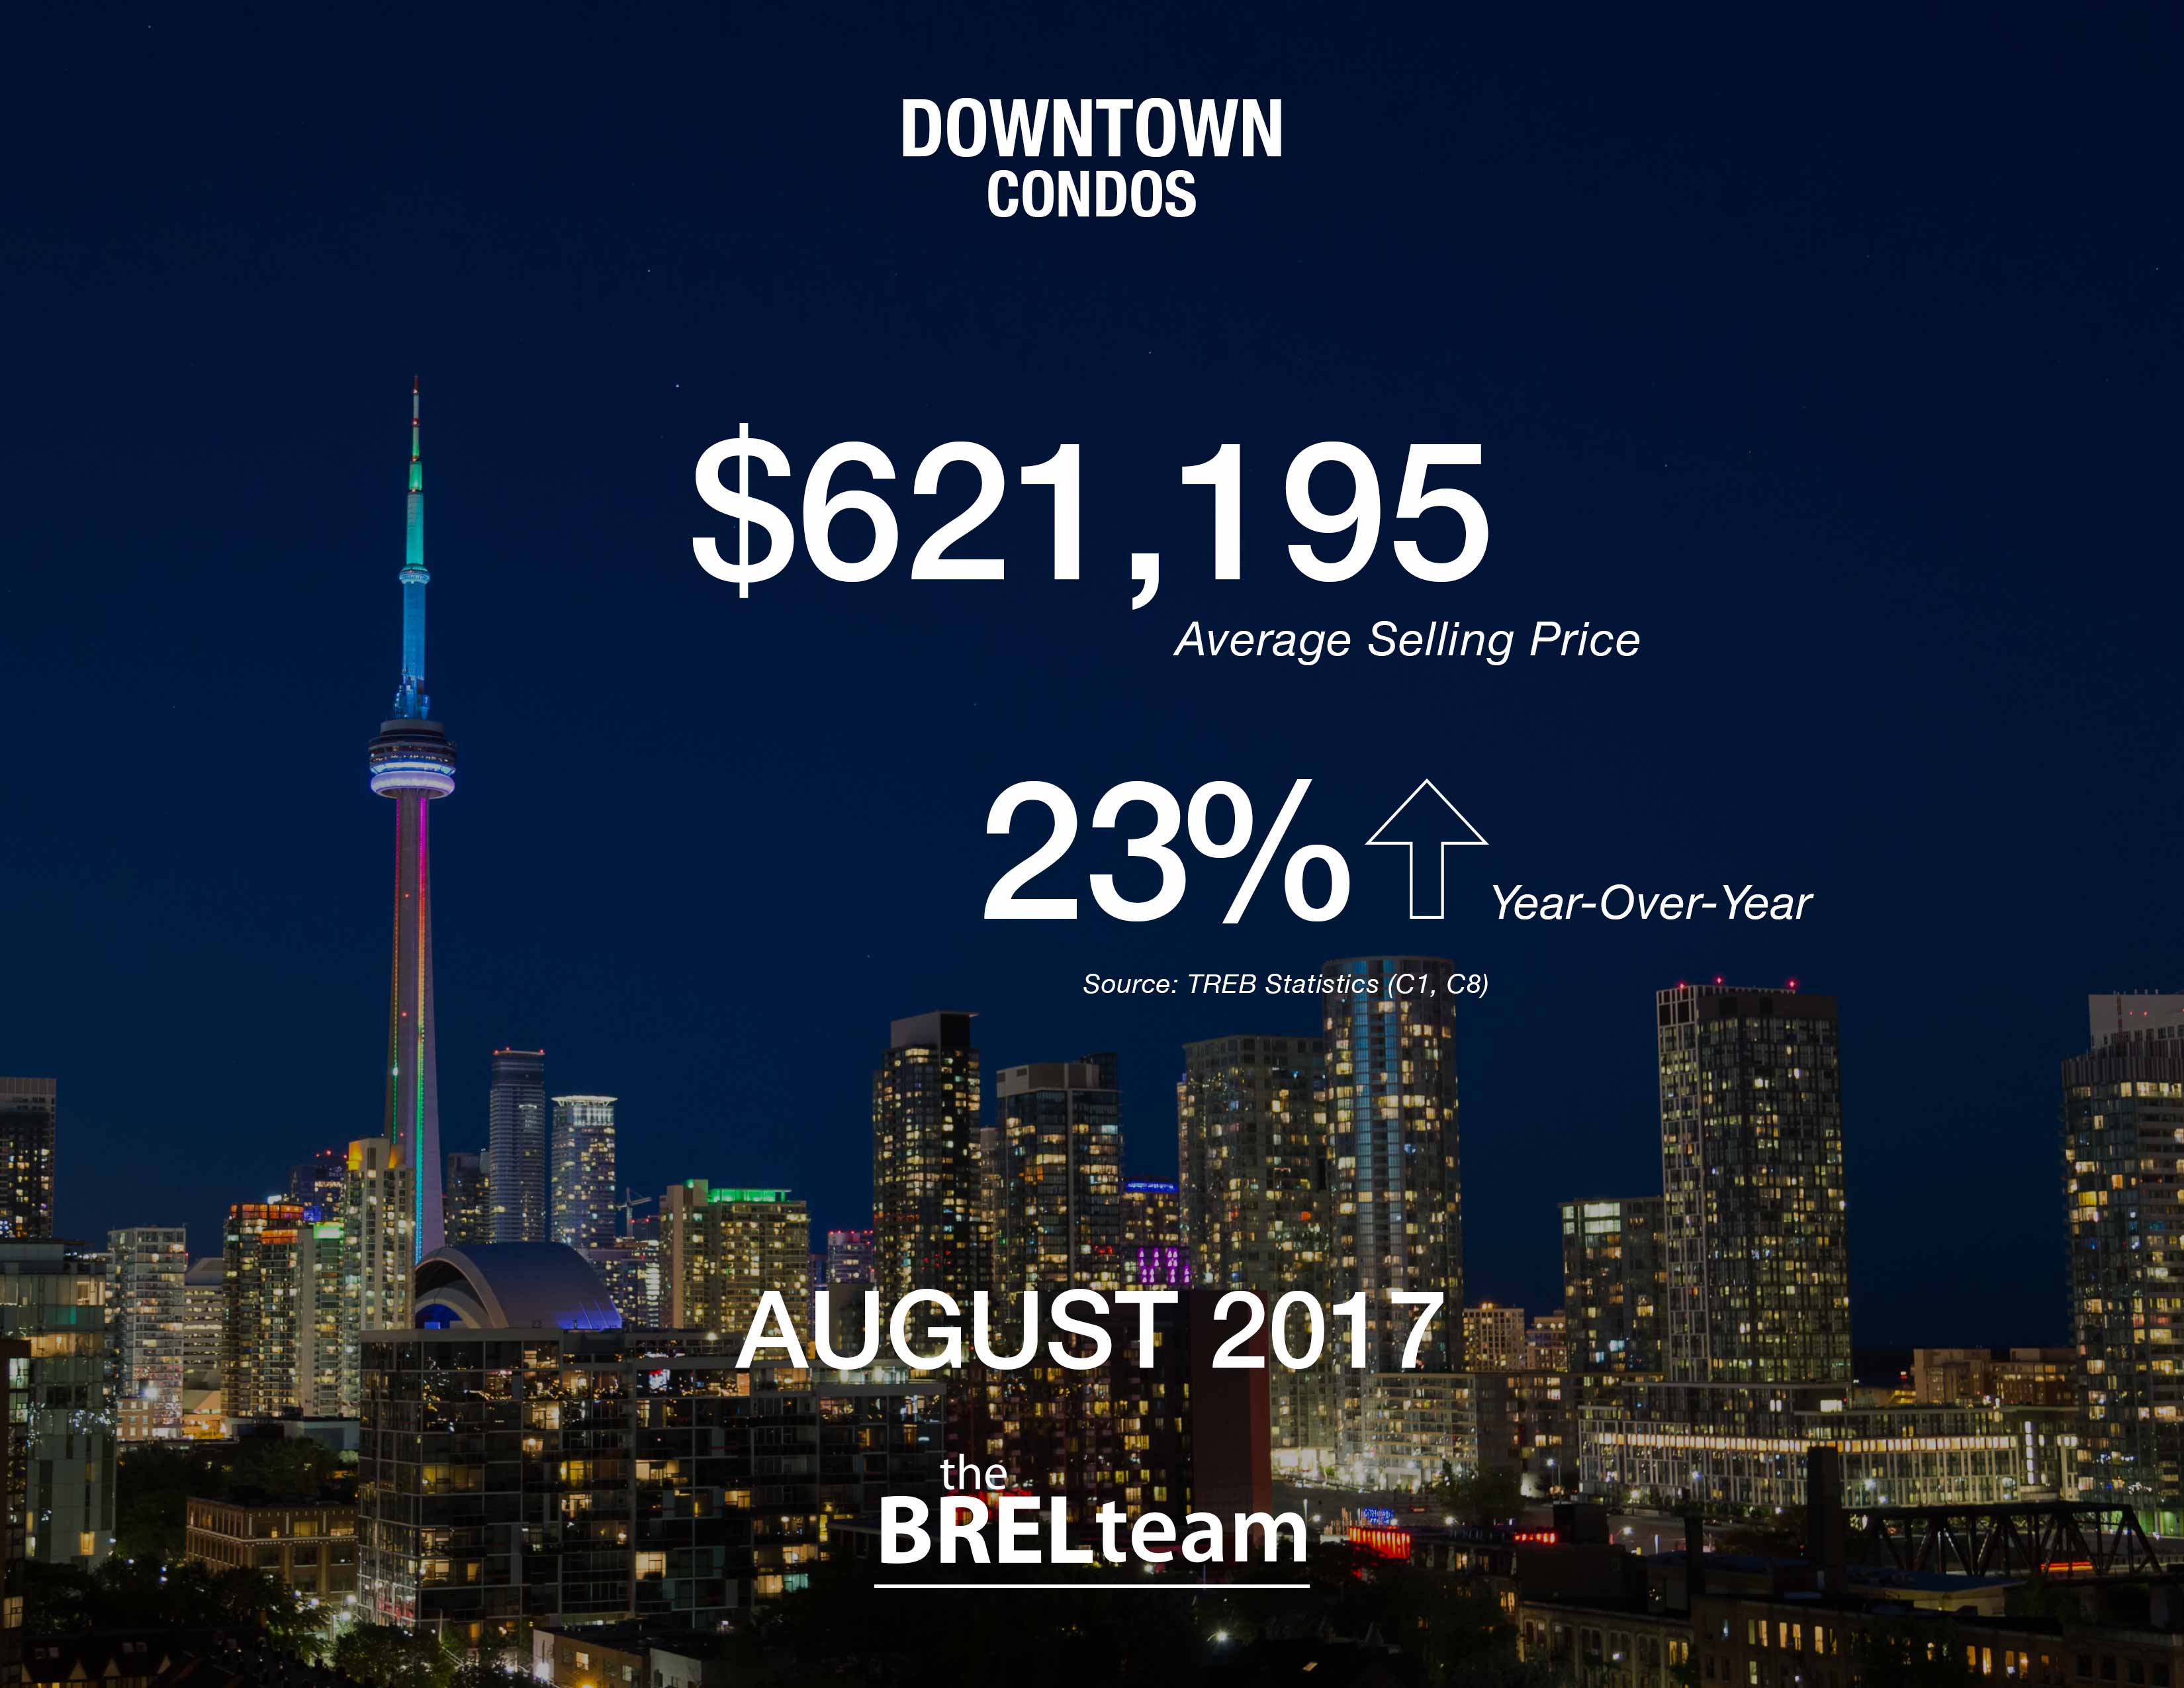 Toronto, Real Estate, the BREL team, getwhatyouwant, downtown